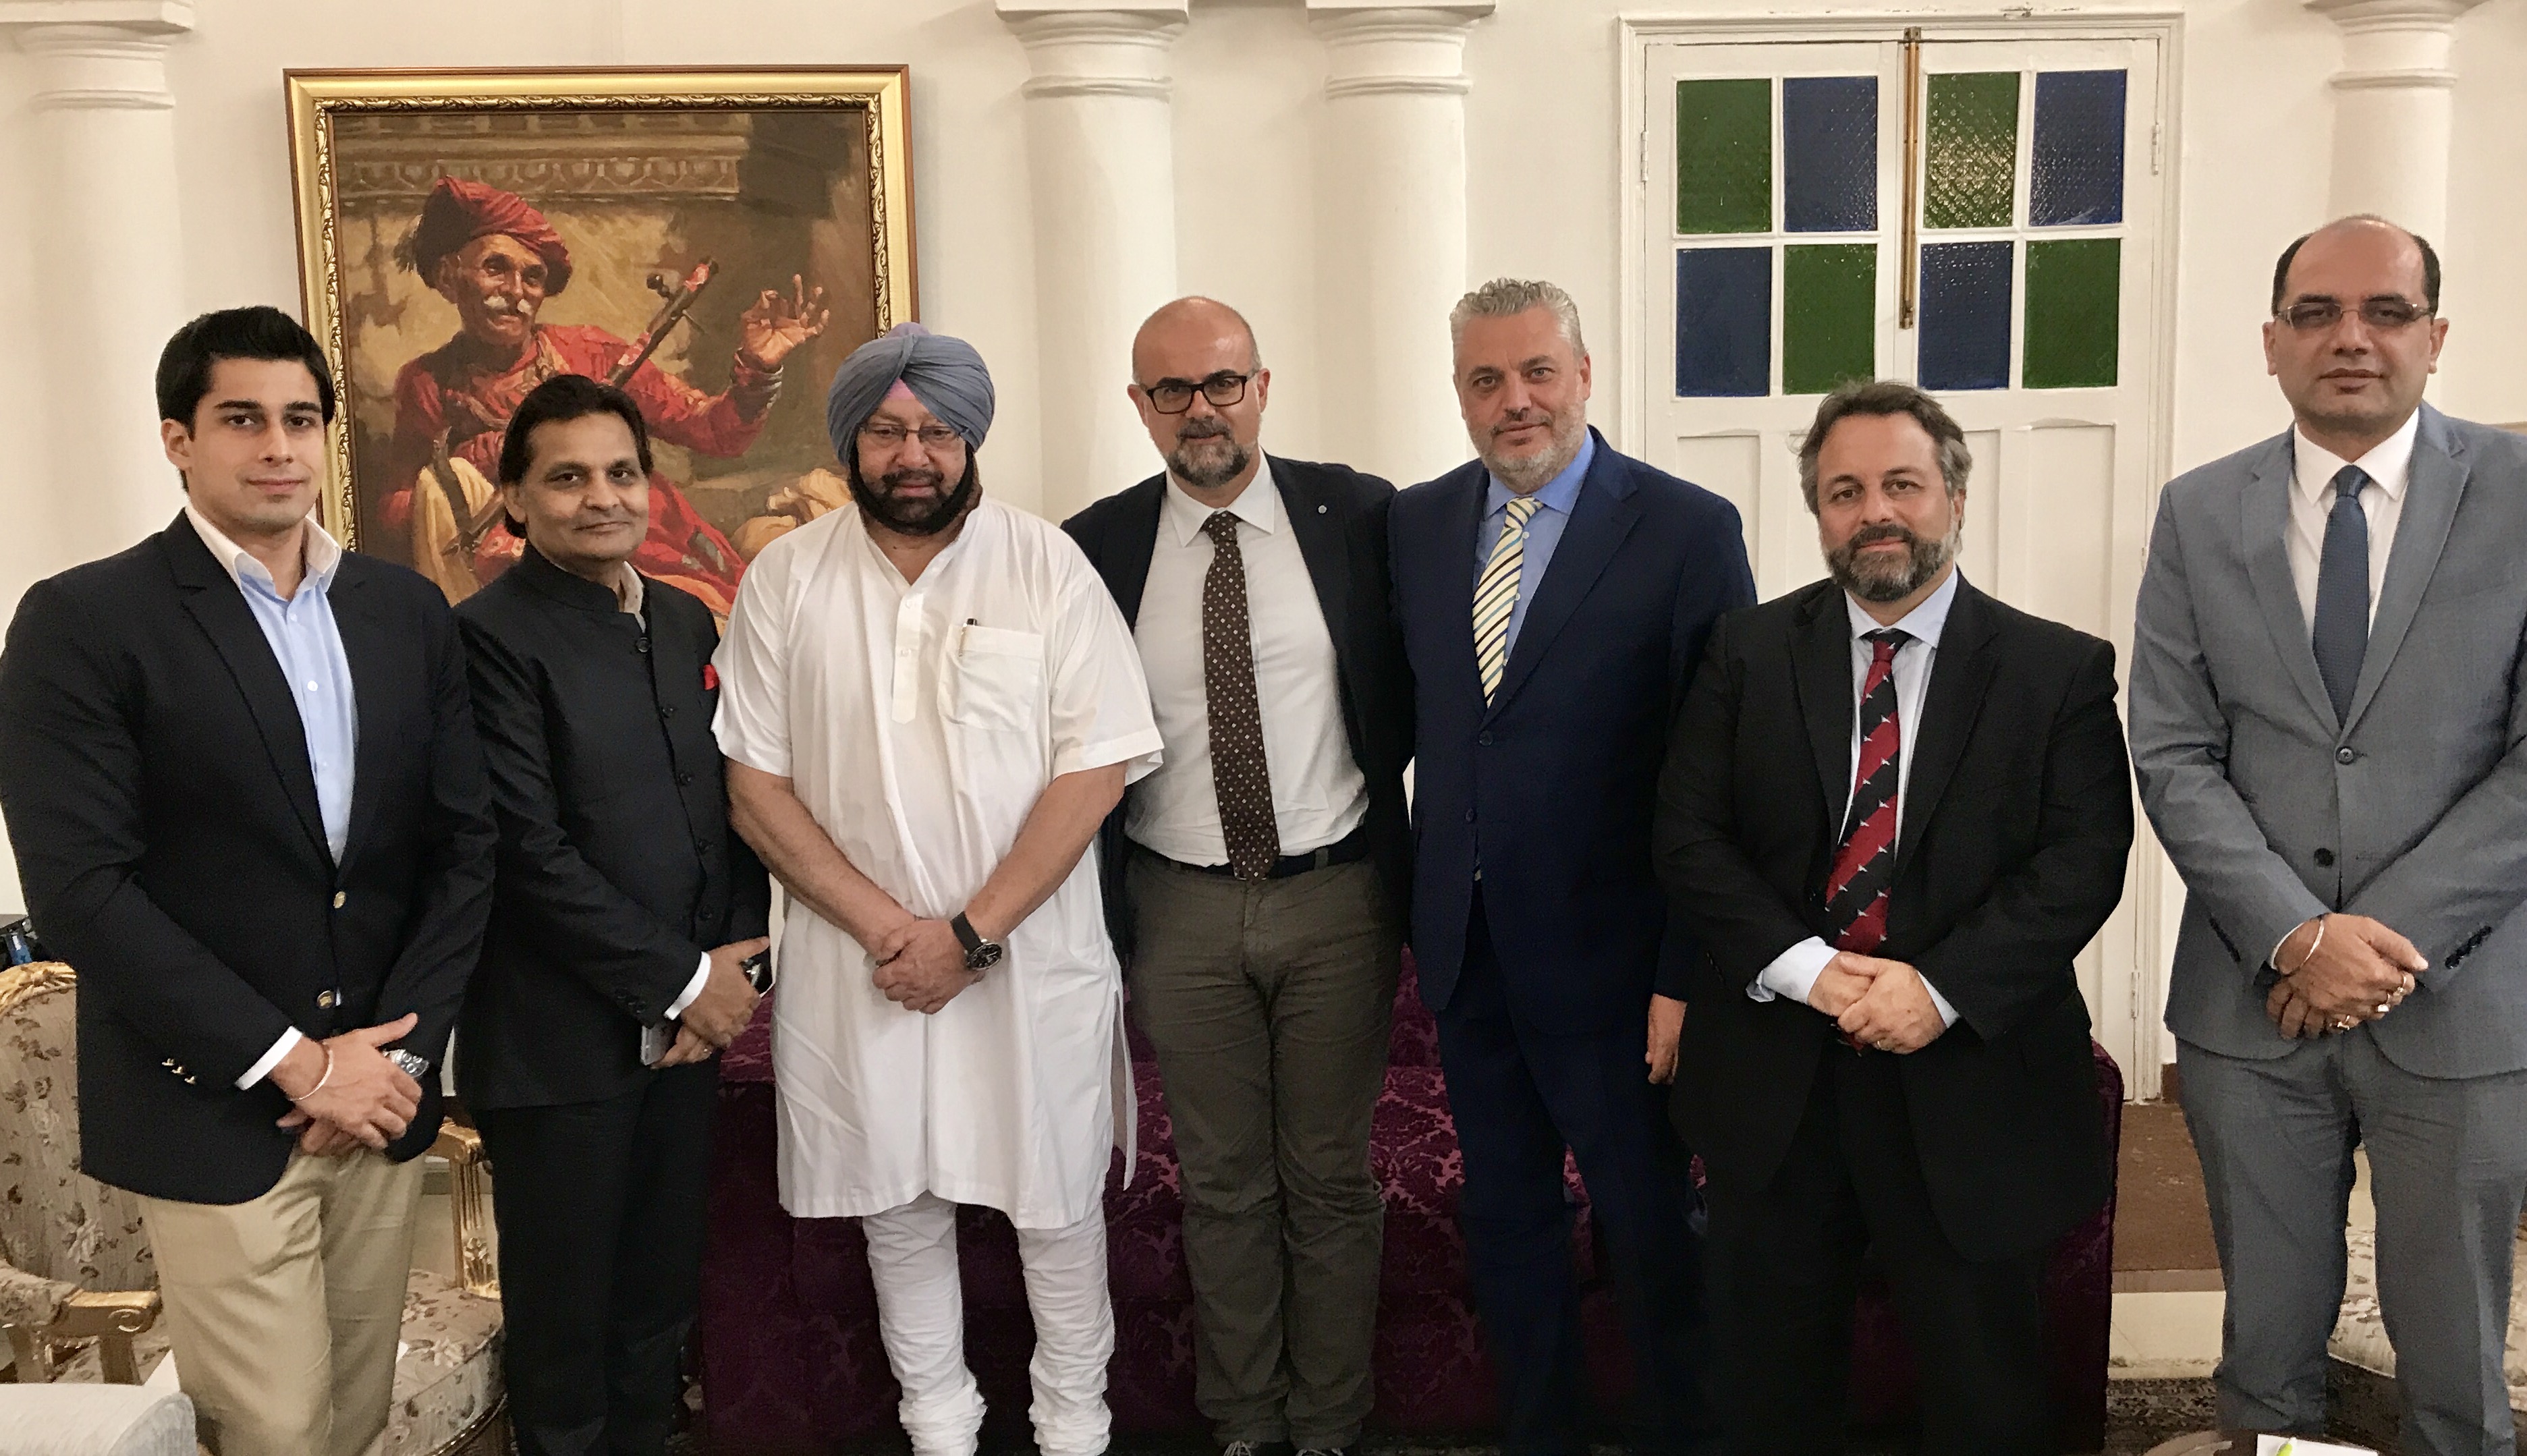 Italy evinces interest in collaborating with Punjab in agriculture, allied areas